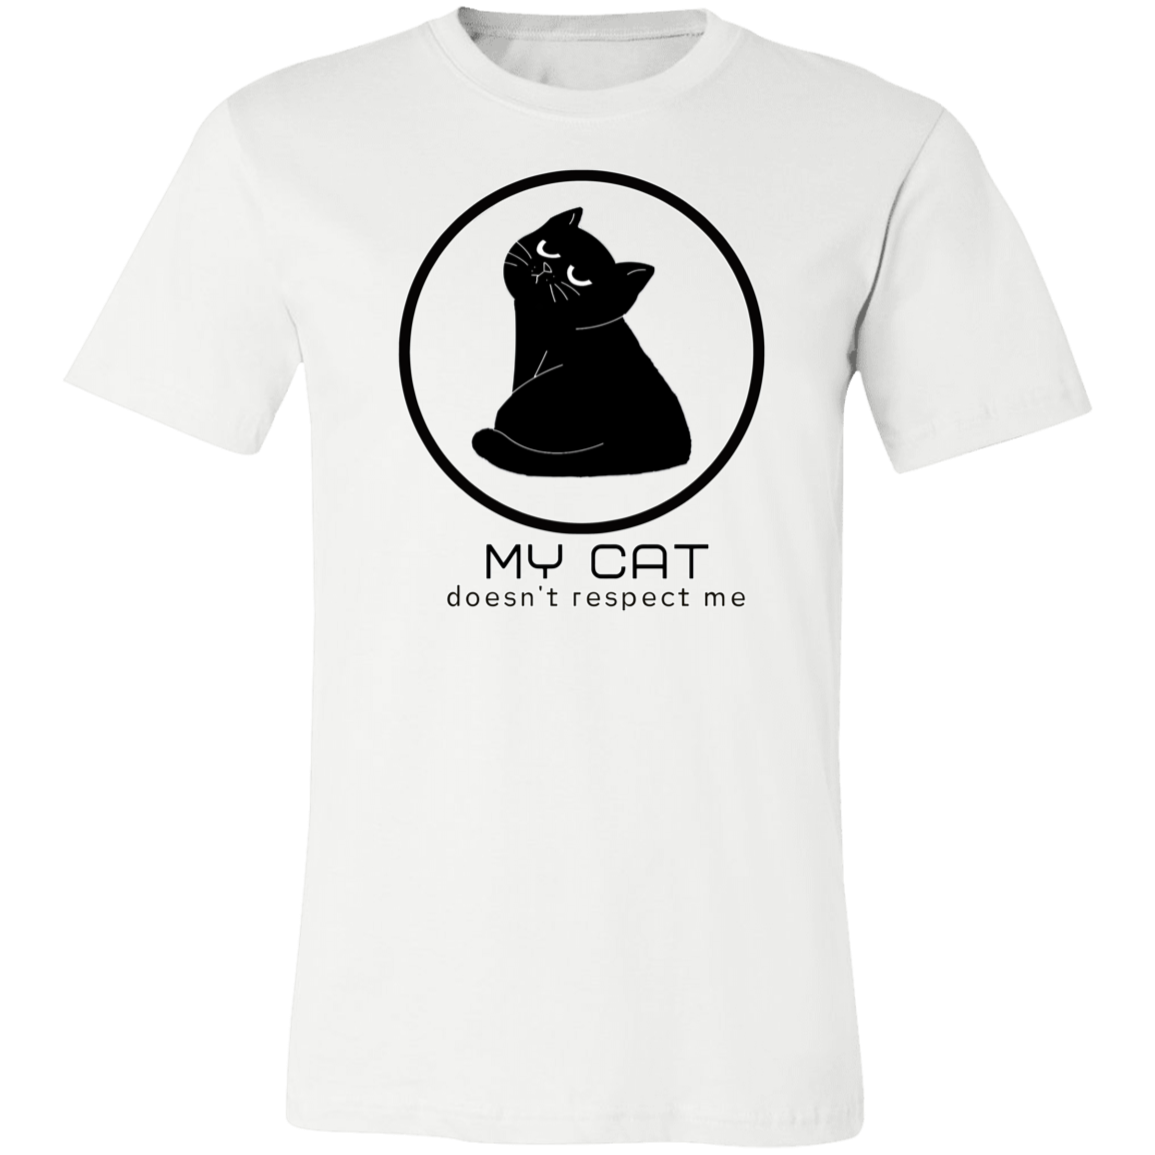 FUNNY CAT DOESN'T RESPECT ME T SHIRT